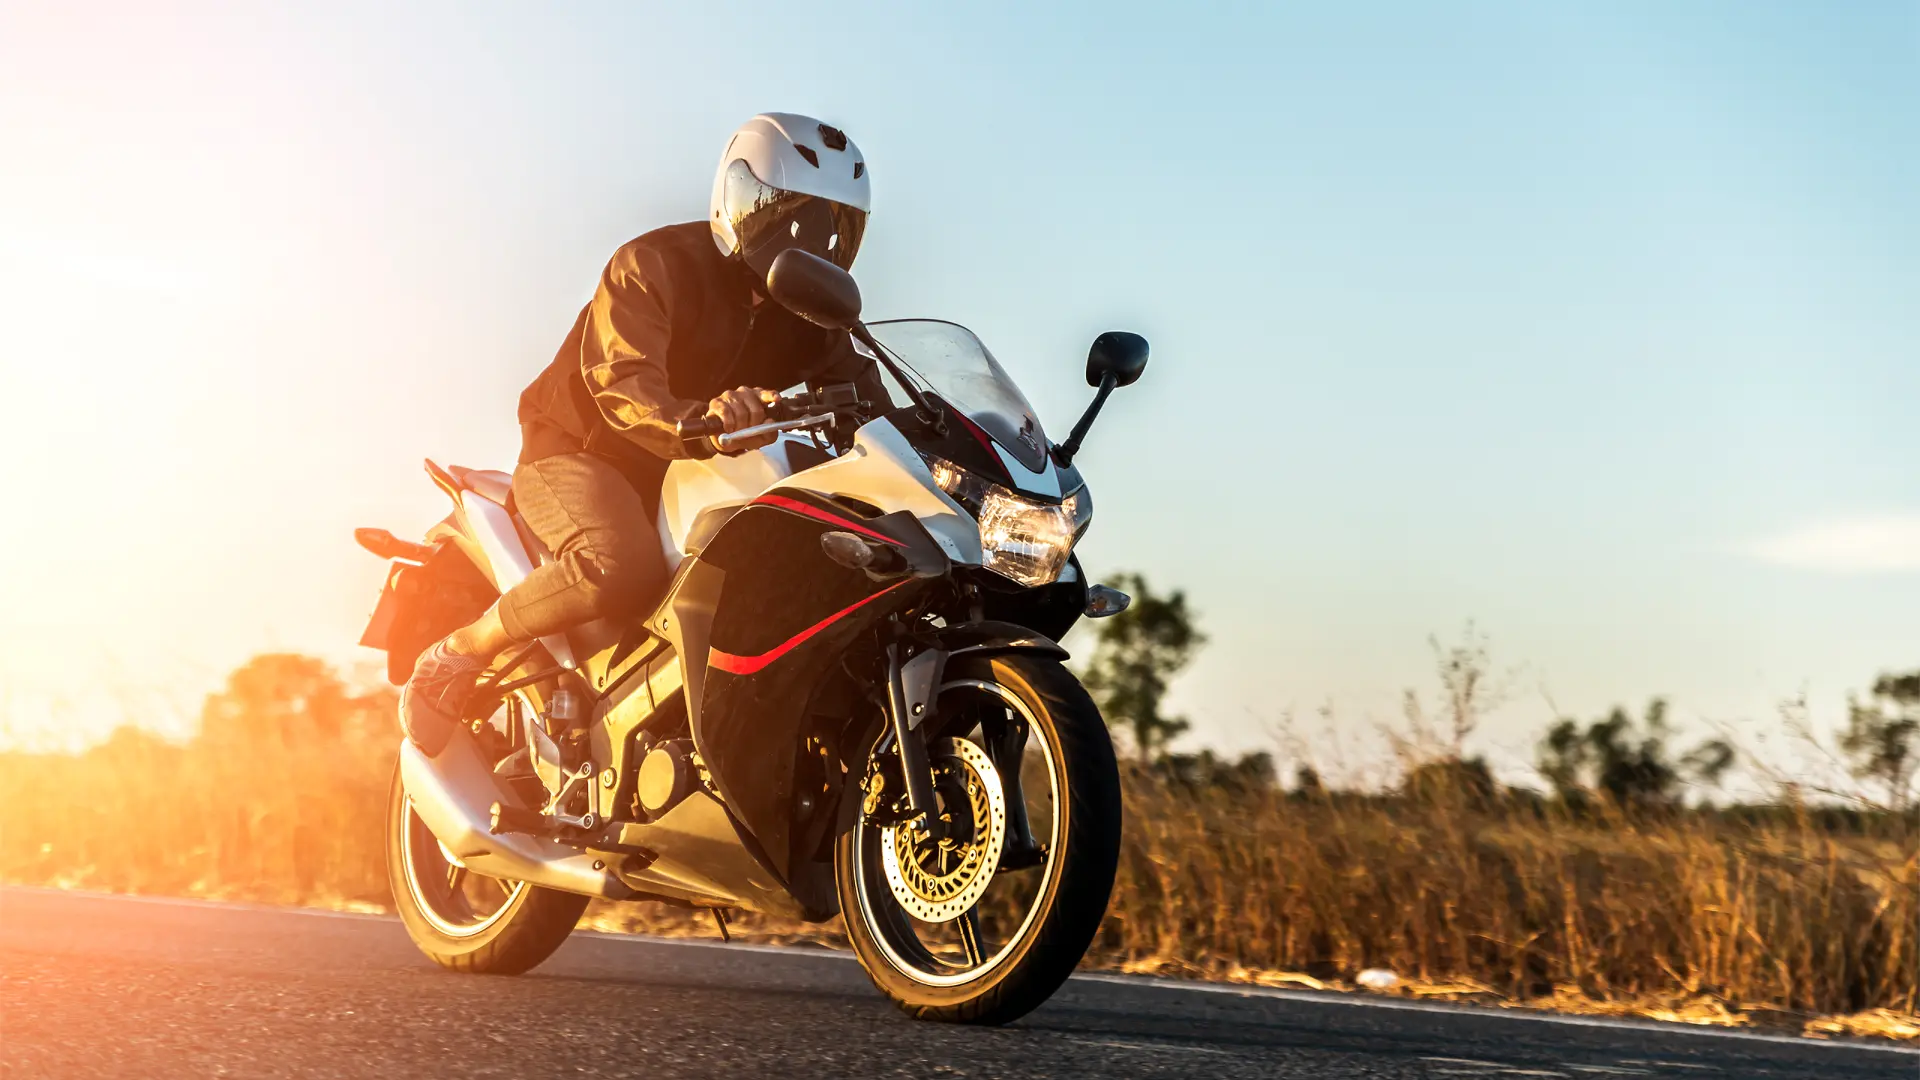 Contenders for Best 300-400cc Bikes in India